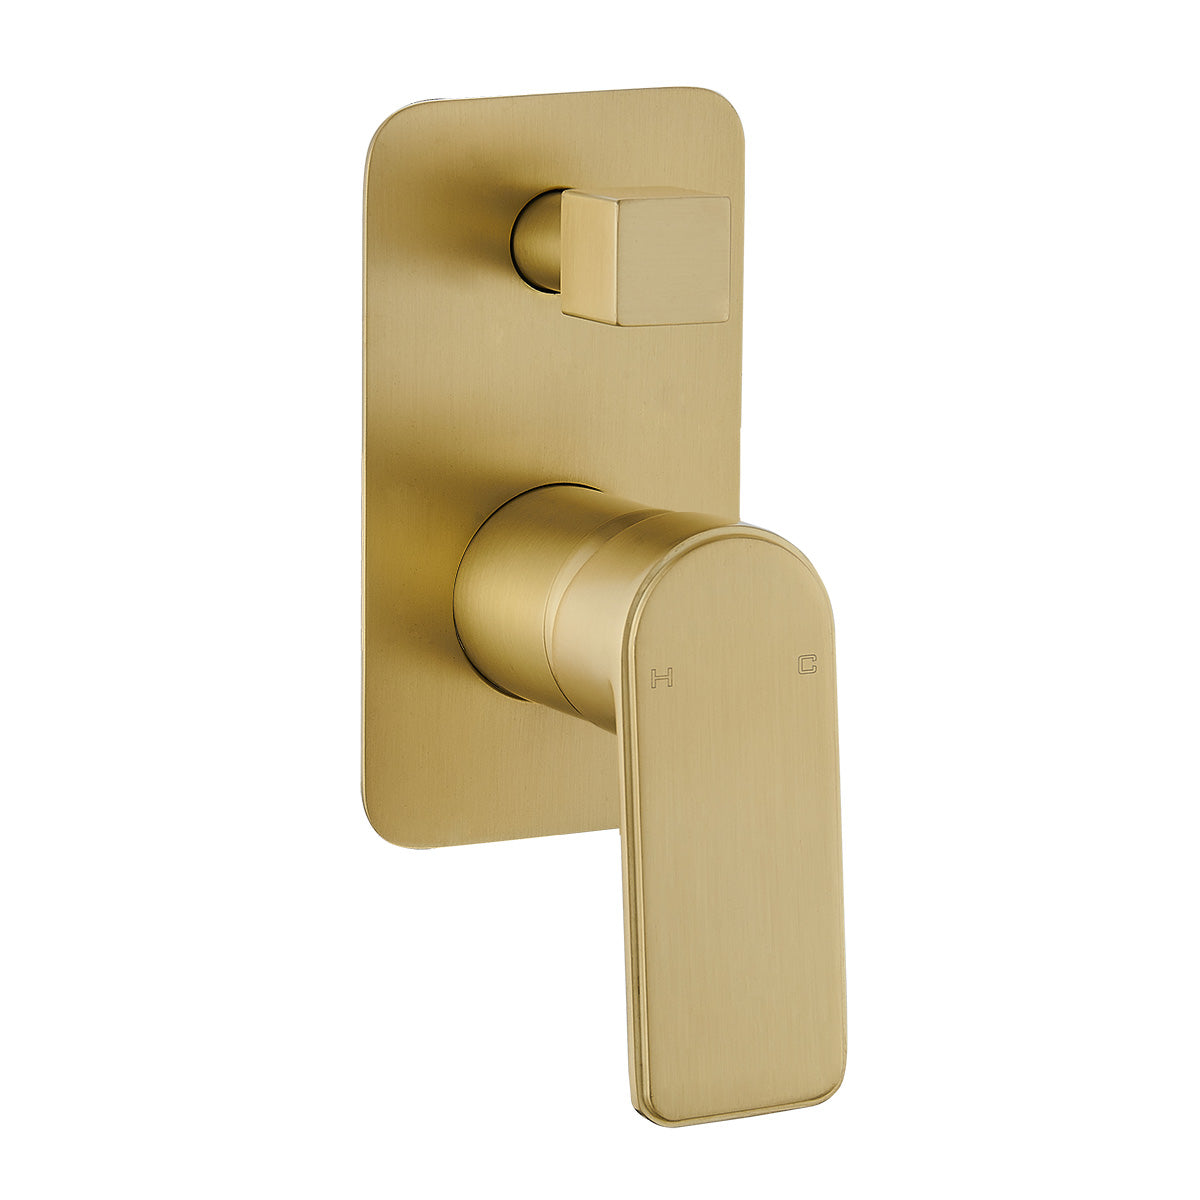 BTWD1 (BG) / Bateau Wall Mixer With Diverter (Brushed Gold)